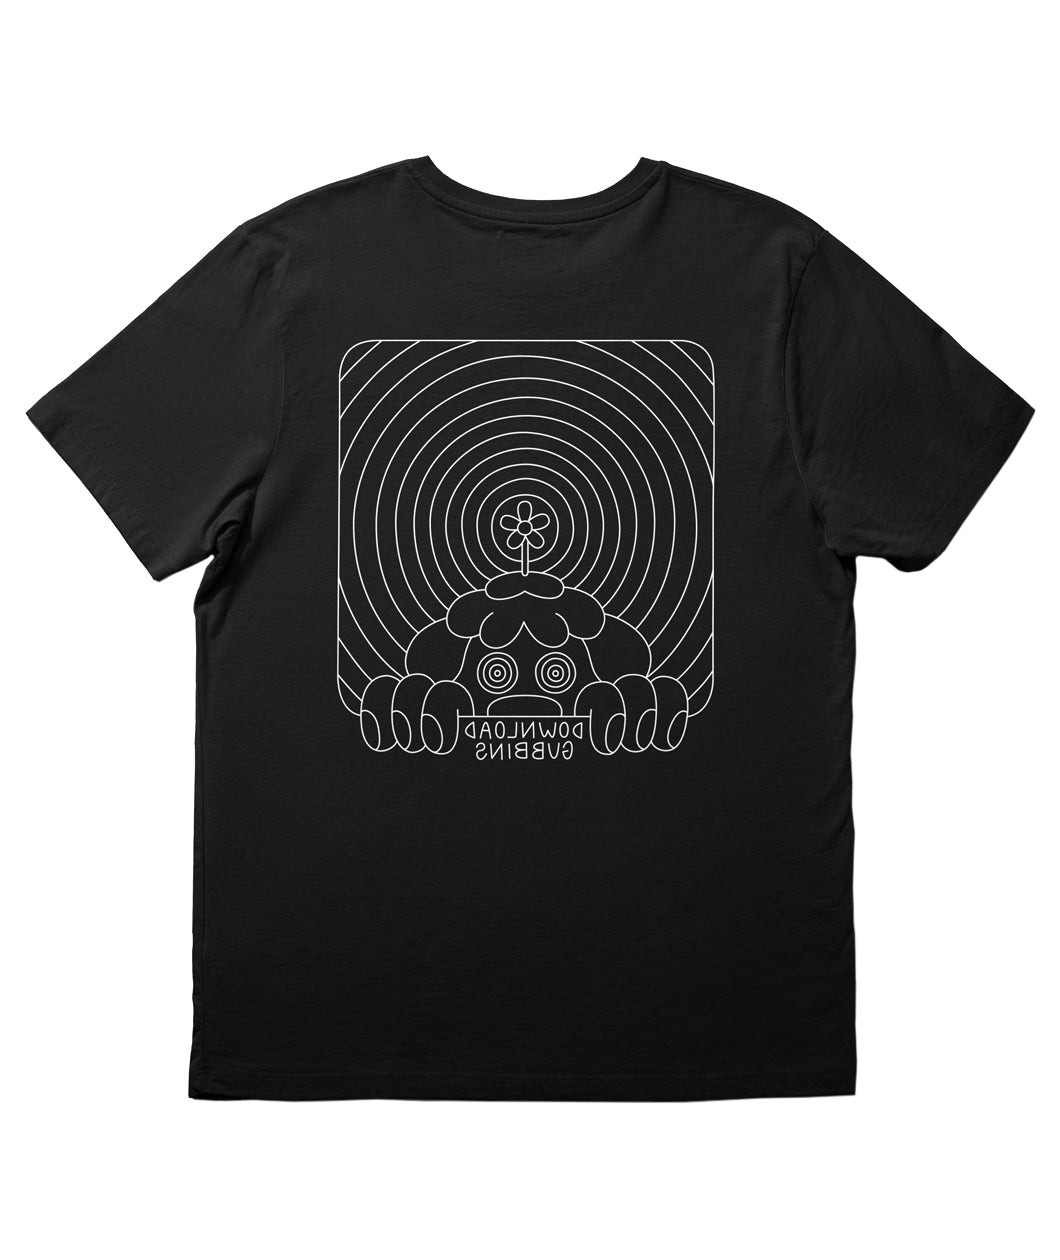 A black t-shirt with a Gubbins’ design on the back. The back of the shirt has artwork of a single large Gubbin. From Gubbins.